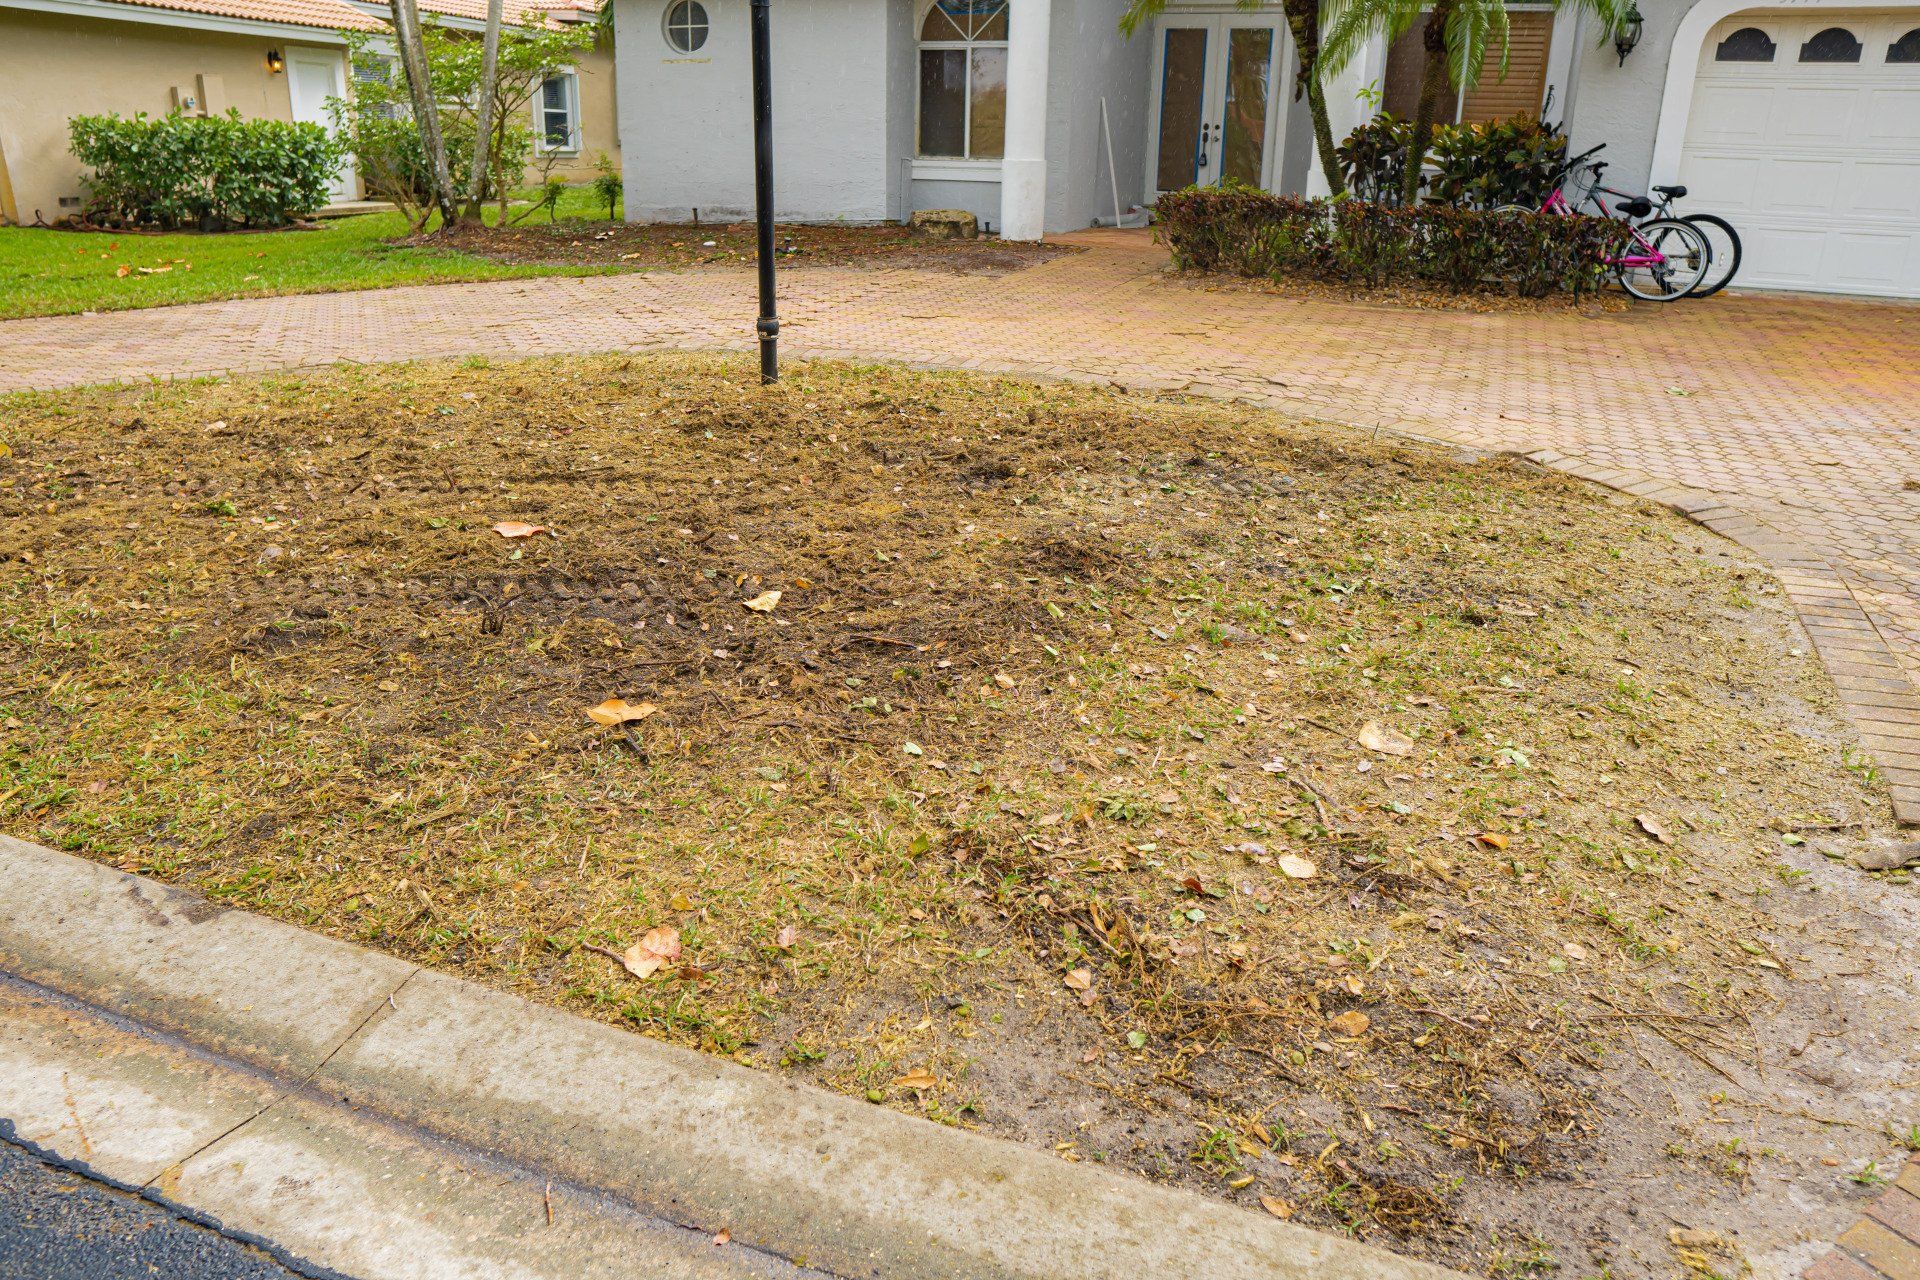 Taking all necessary precautions and using state-of-the-art equipment, our contractors have successfully carried out this emergency tree removal in Naples.